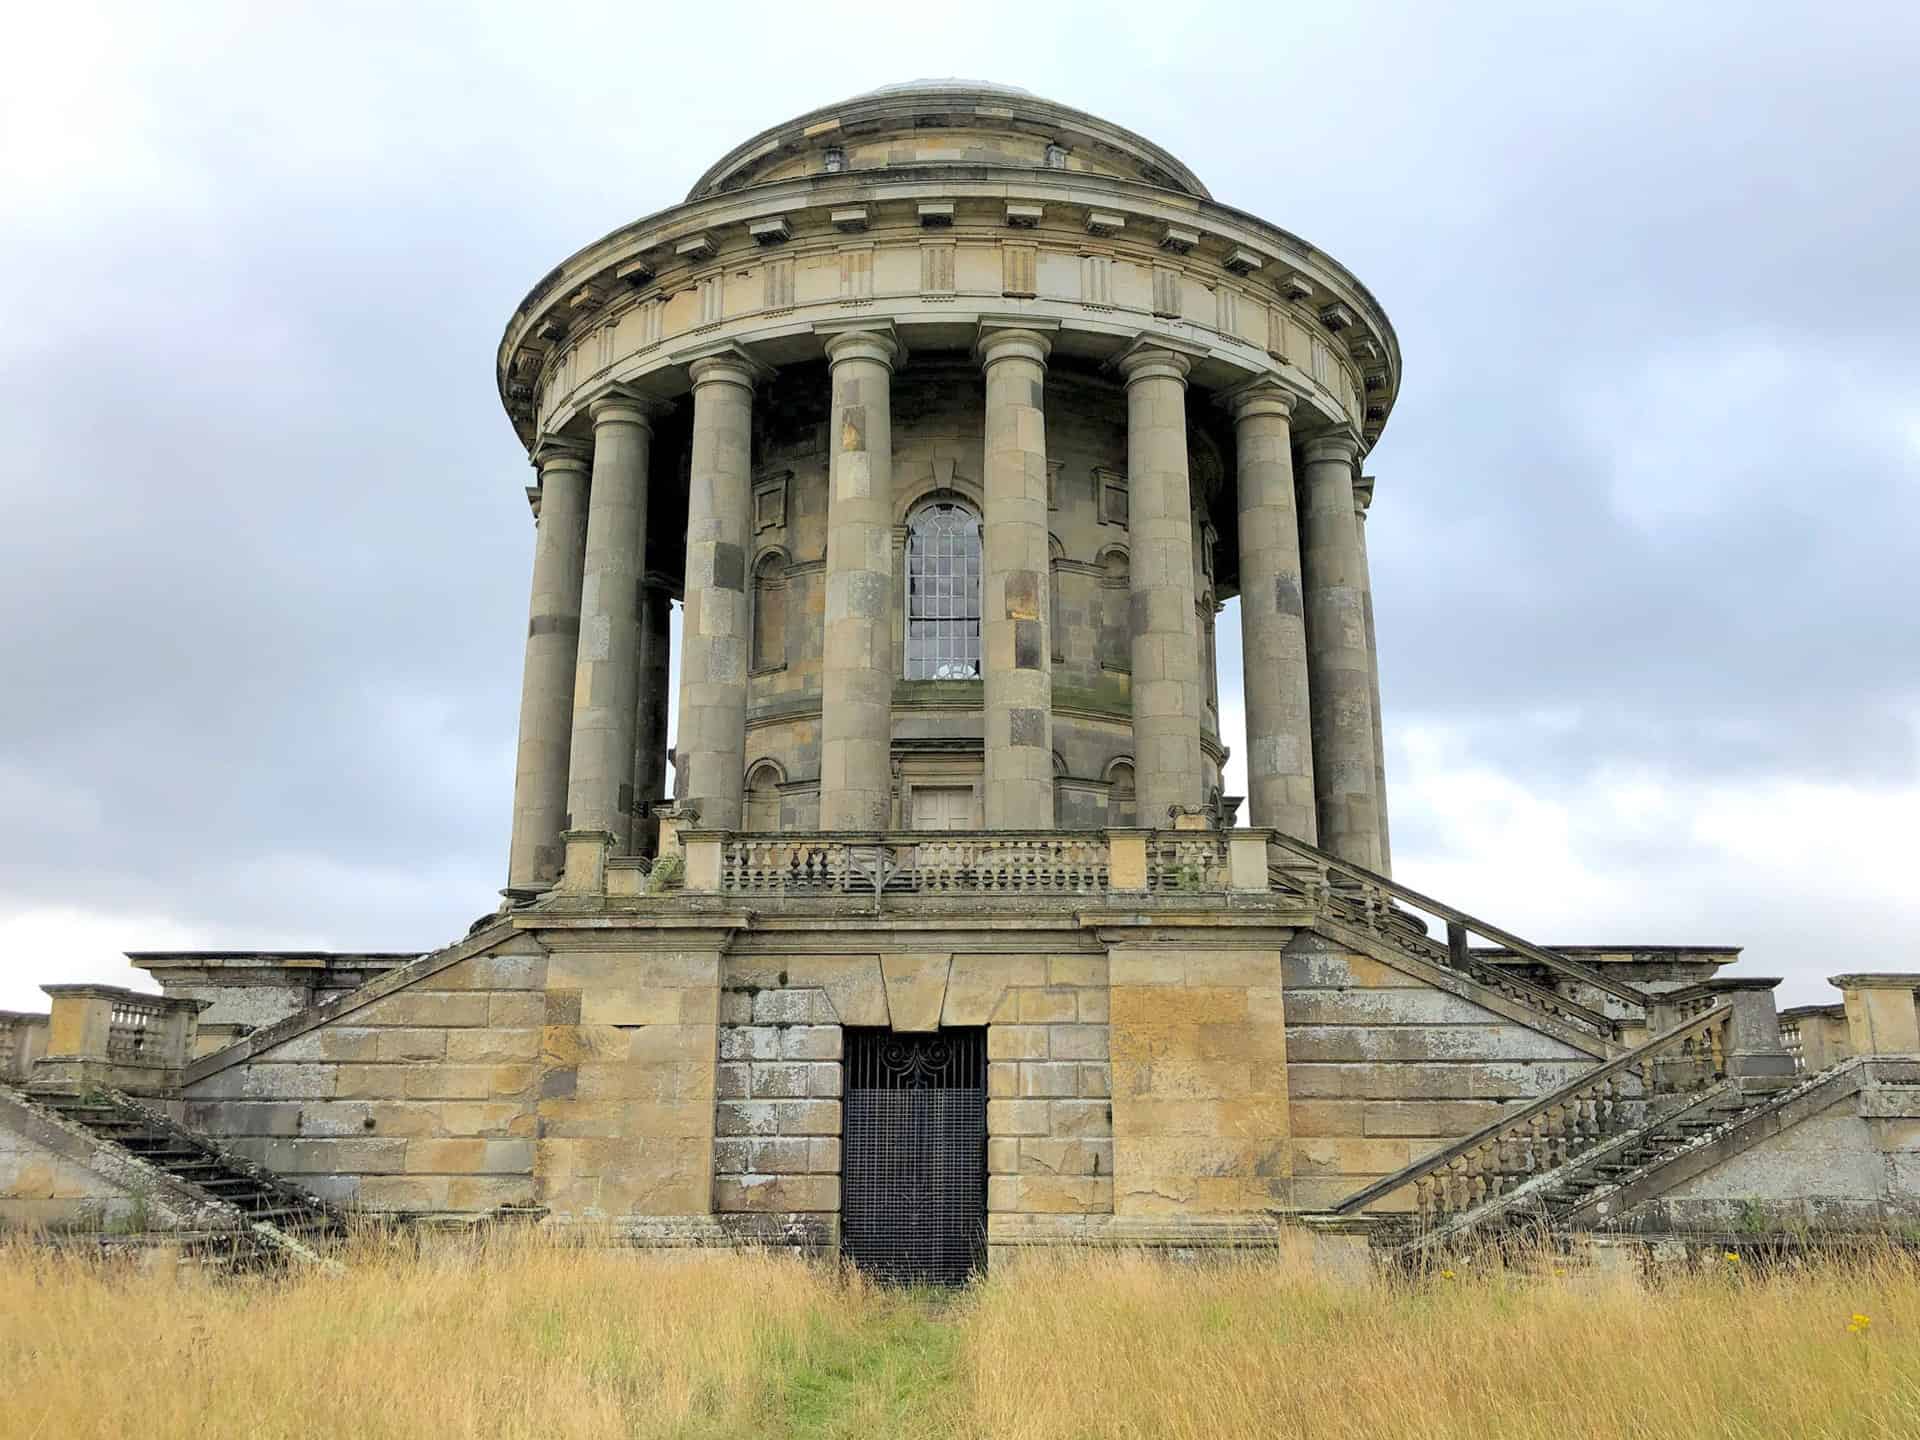 The Mausoleum rises 90 feet into the air and is supported by a colonnade of 20 pillars. Designed by Nicholas Hawksmoor, it is one of the finest free-standing mausoleums in northern Europe.